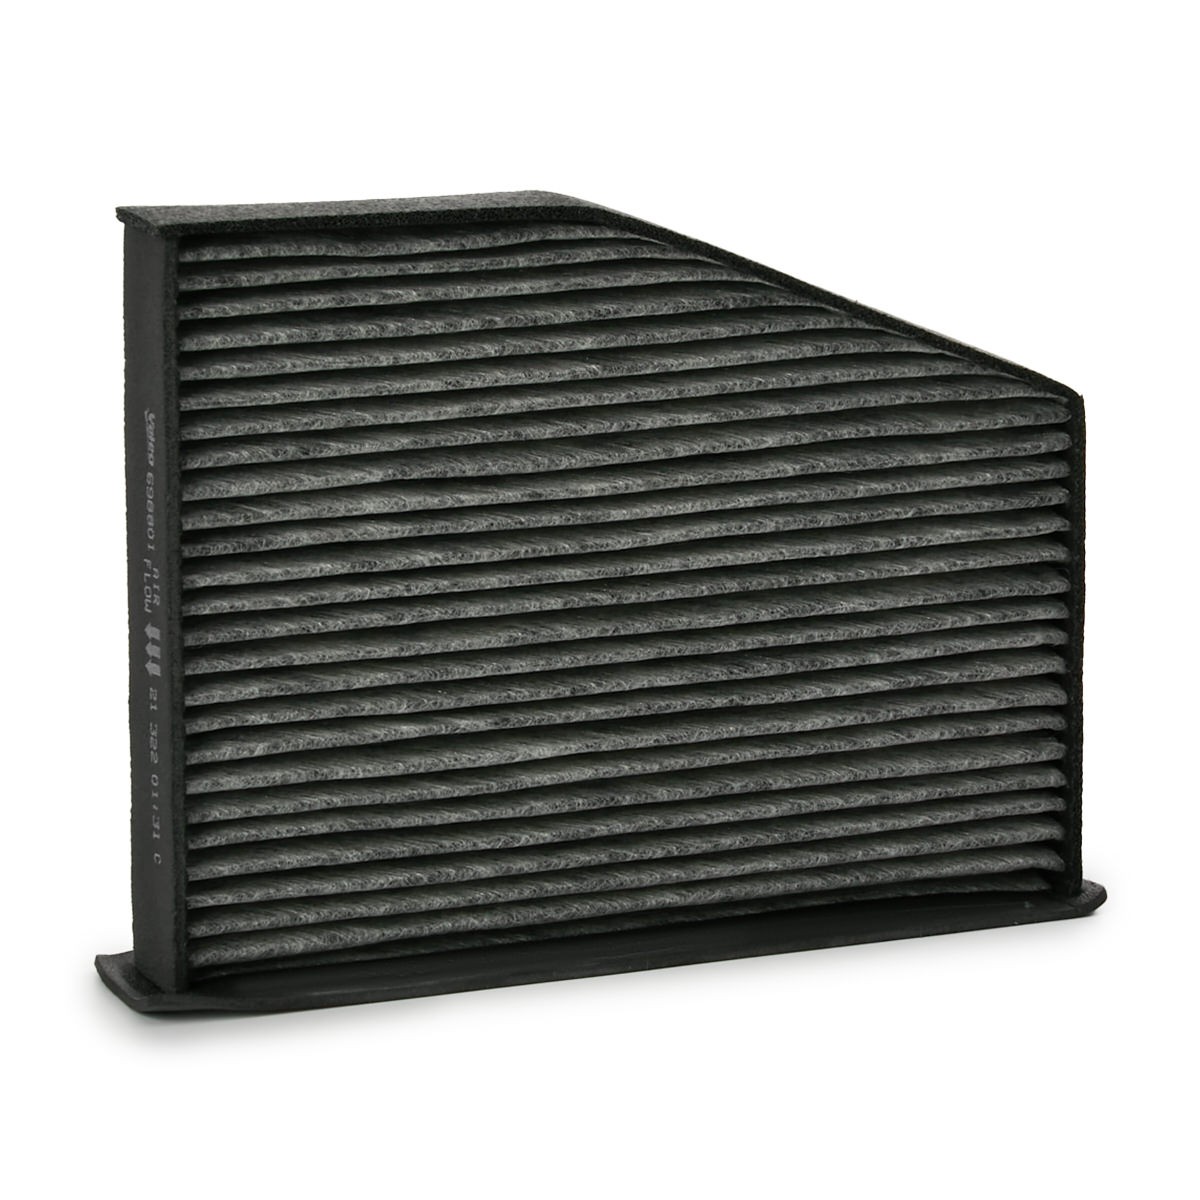 VALEO CLIMFILTER PROTECT 698801 Pollen filter Activated Carbon Filter, 279 mm x 216 mm x 57 mm